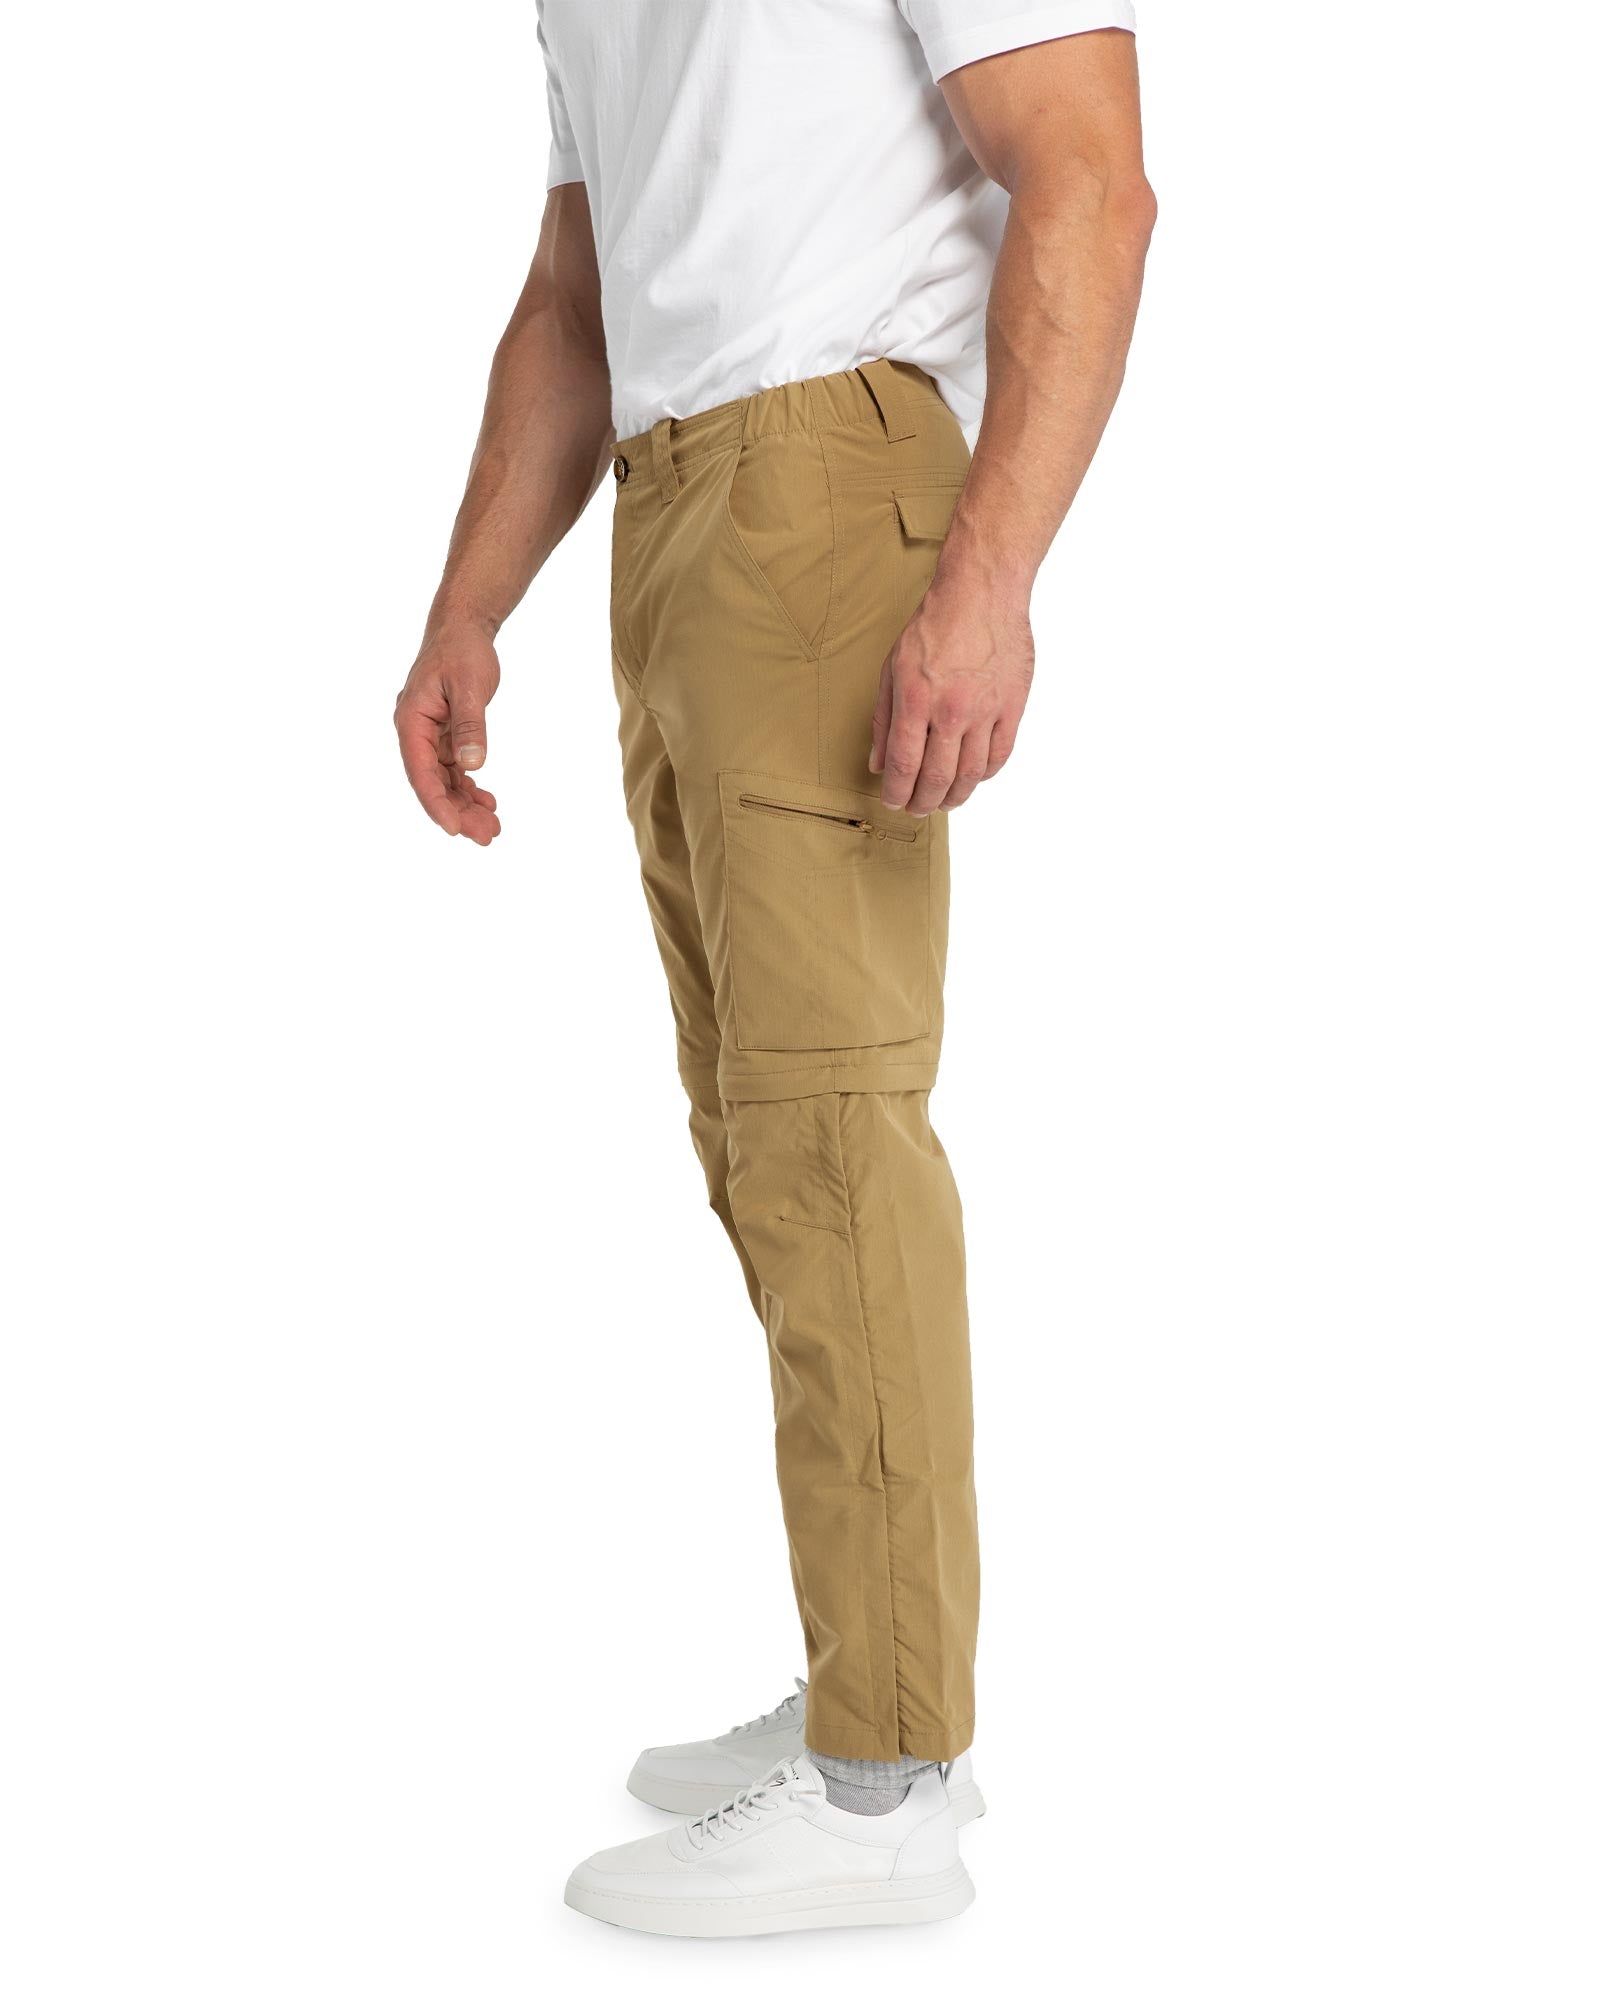 Buy Six-Pocket Regular fit Cargo Pants for Men, Stretchable Cargo Pants  with Cotton-Lycra Fabric Soft Finish, Extra Stretch, and deep Pockets